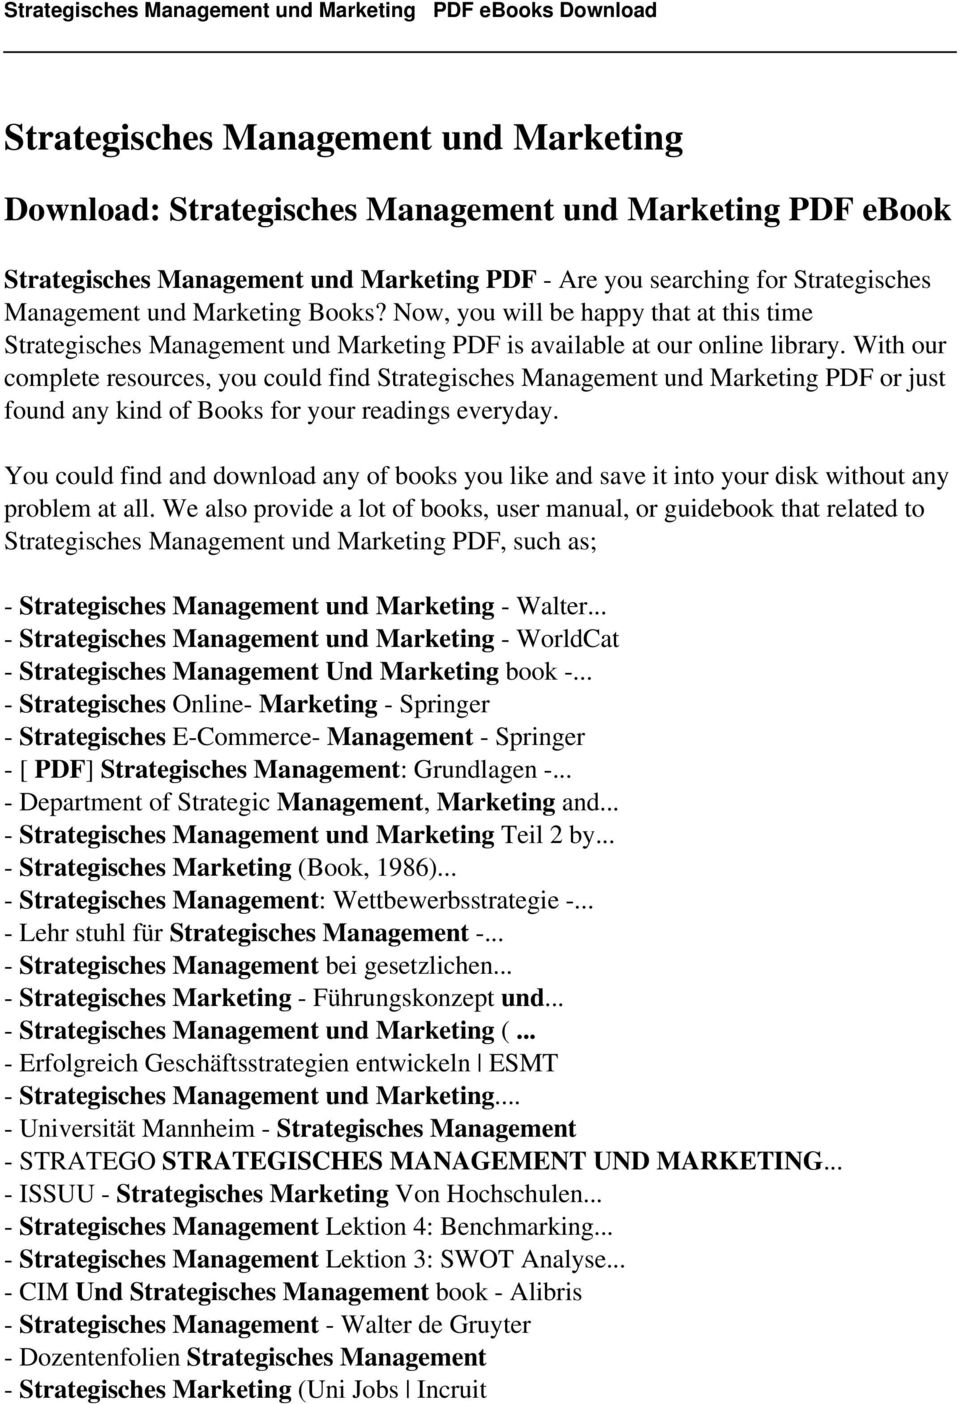 With our complete resources, you could find Strategisches Management und Marketing PDF or just found any kind of Books for your readings everyday.